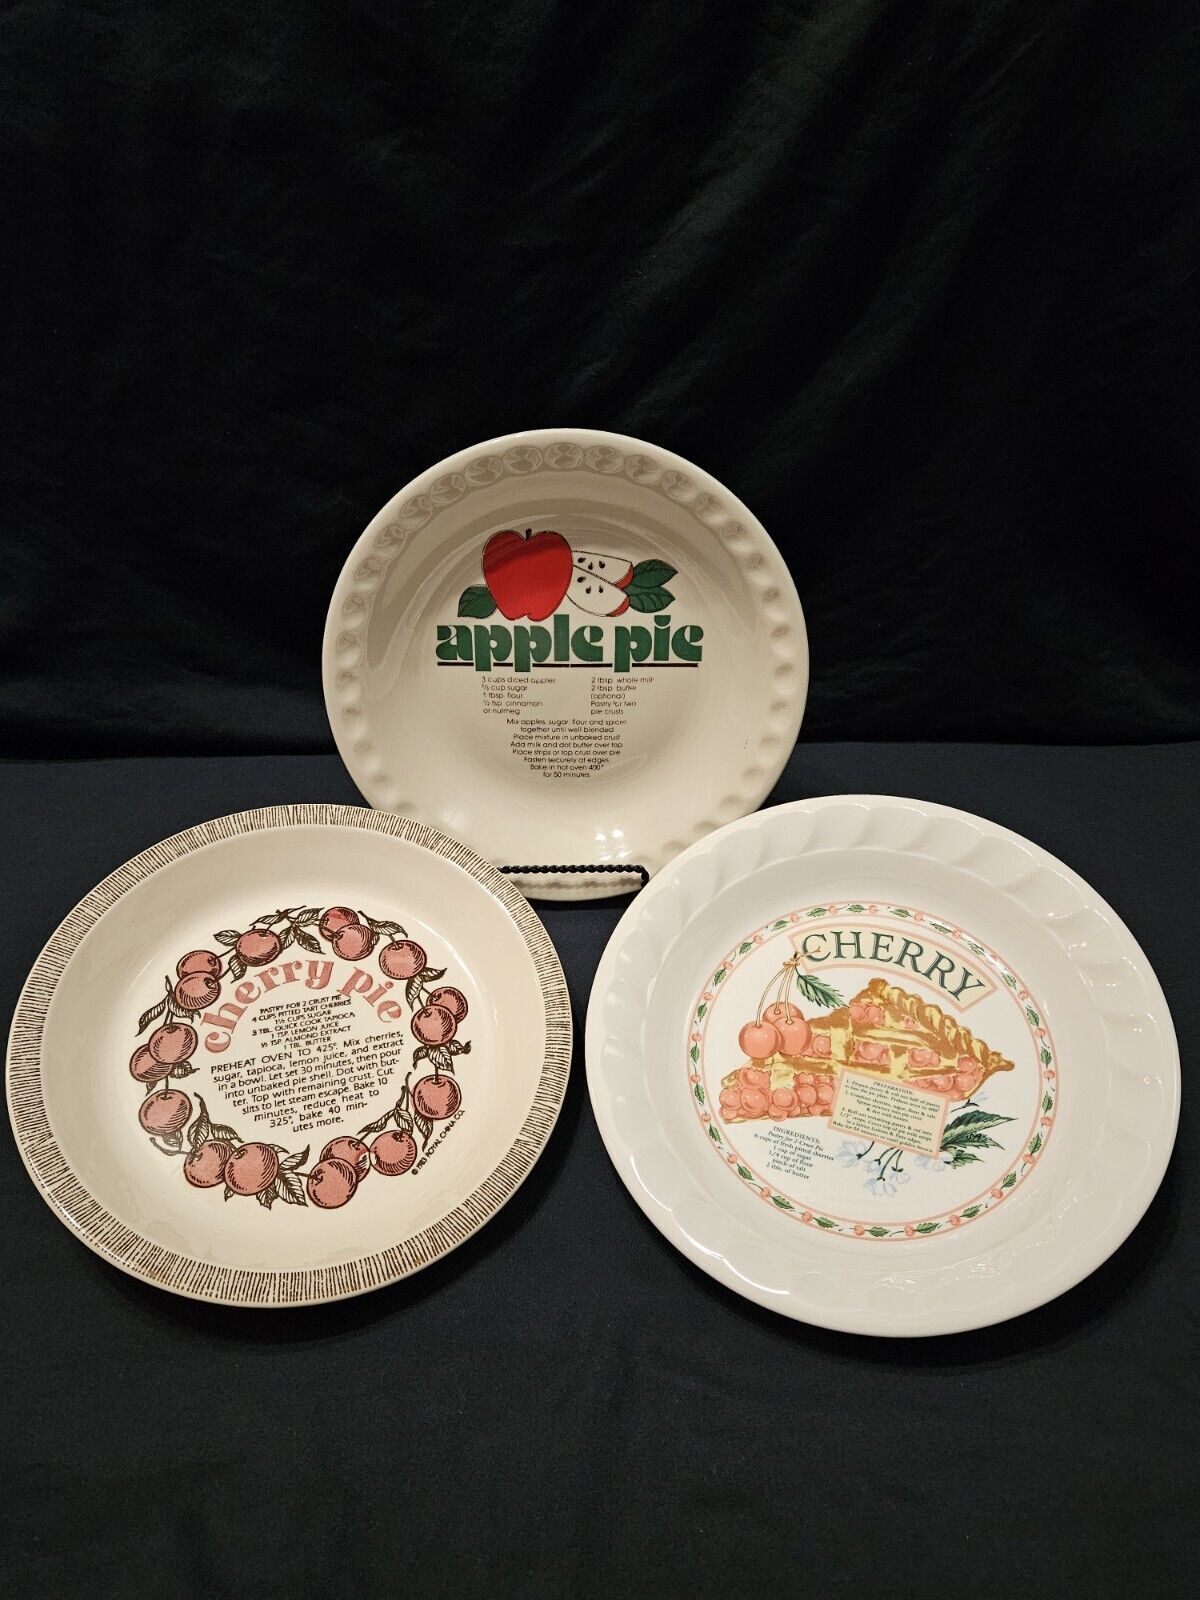 Lot/3 - 2 Cherry & 1 Apple Pie Recipe Baking Plates/Dishes Country Decor Vintage